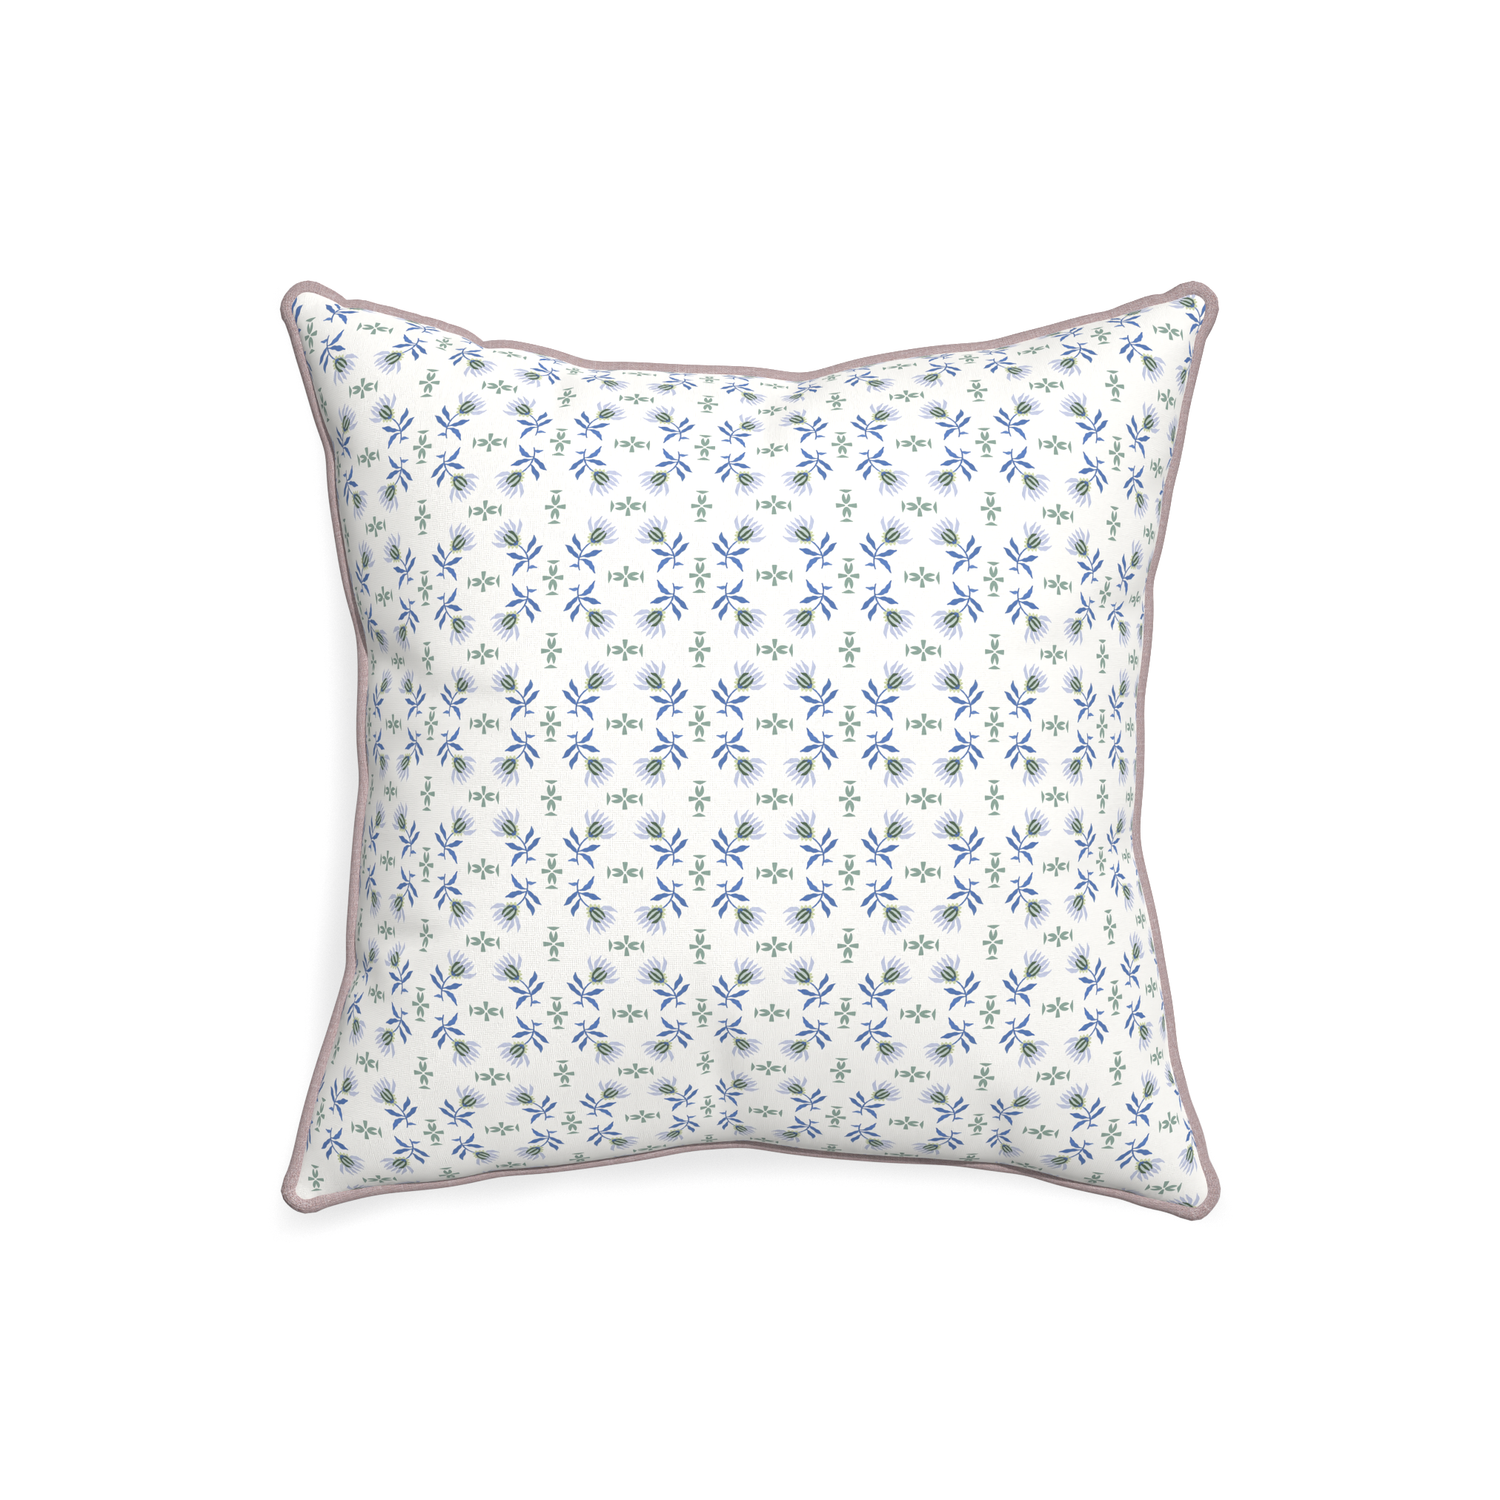 20-square lee custom blue & green floralpillow with orchid piping on white background